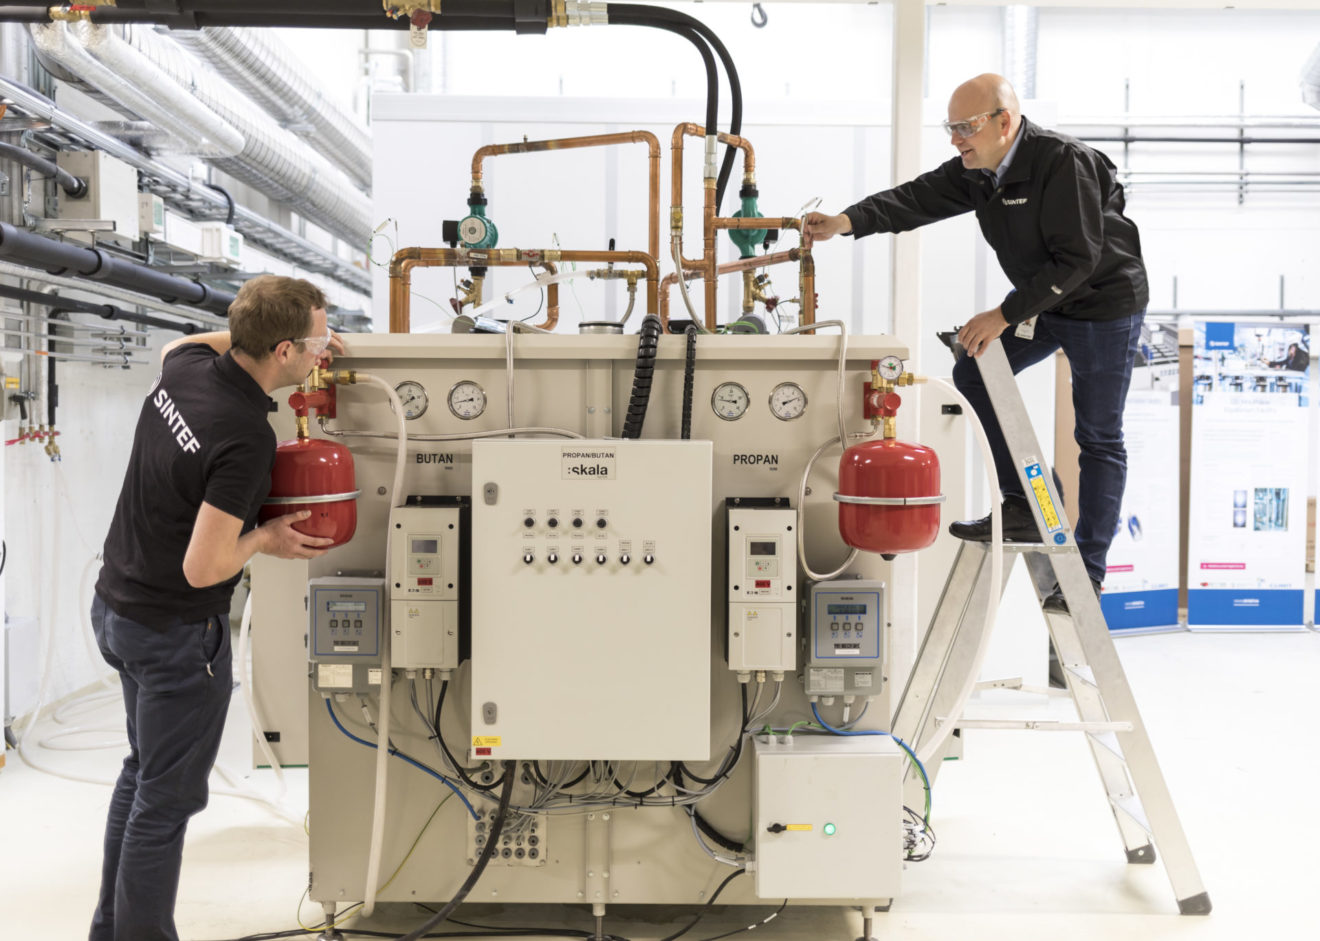 Phase-out of fossil fuels: SINTEF develops a novel high temperature heat pump (New article out)